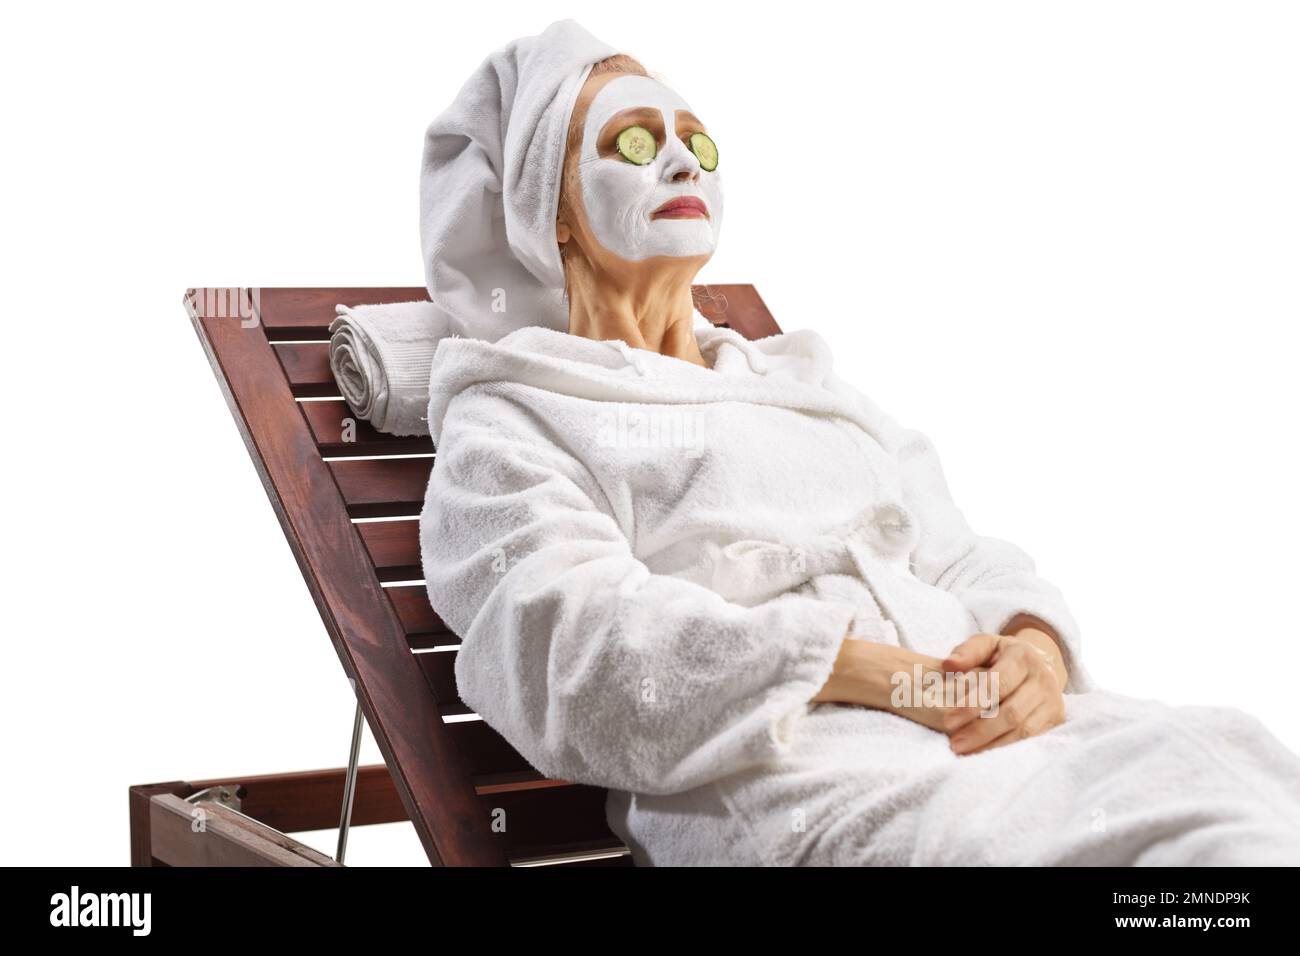 Woman with towel on her head and a face mask resting on a lounge chair isolated on white background Stock Photo